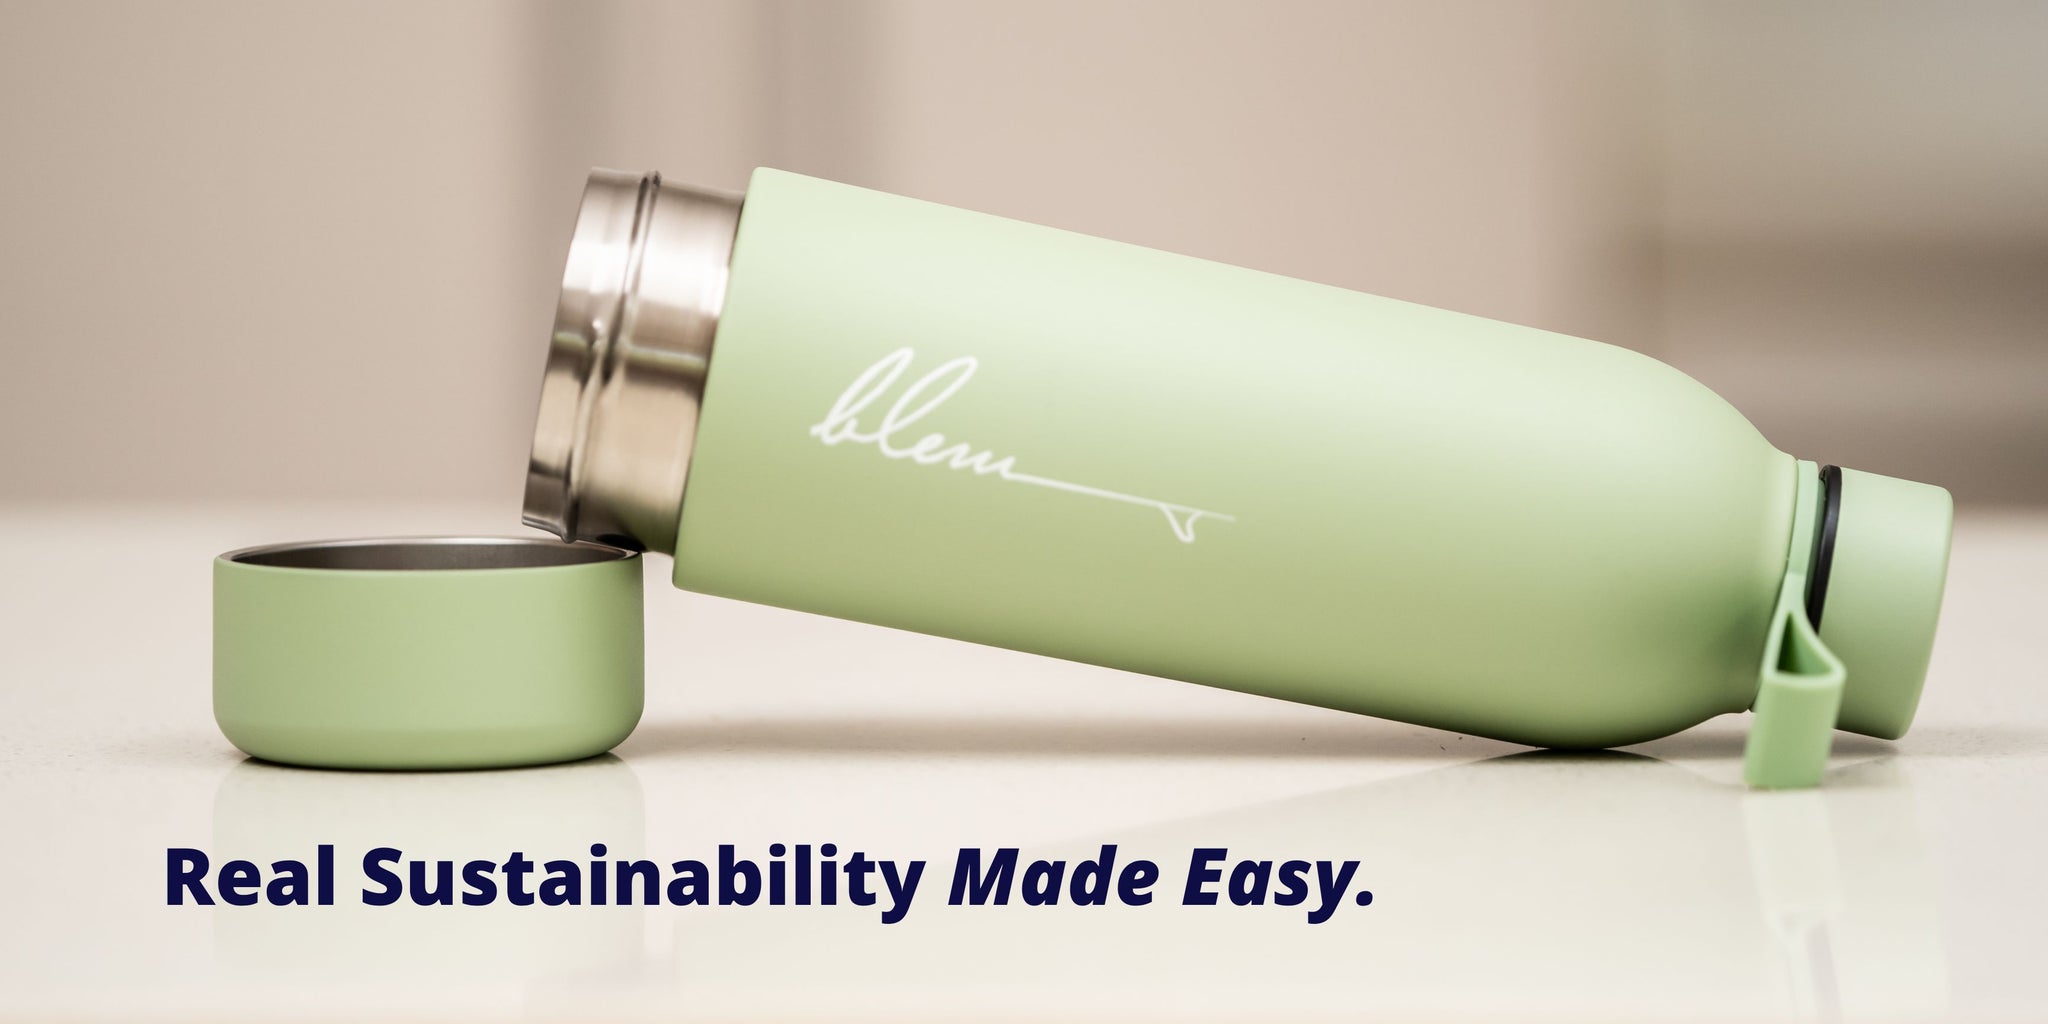 The Blem Bottle : Real Sustainability Made Easy